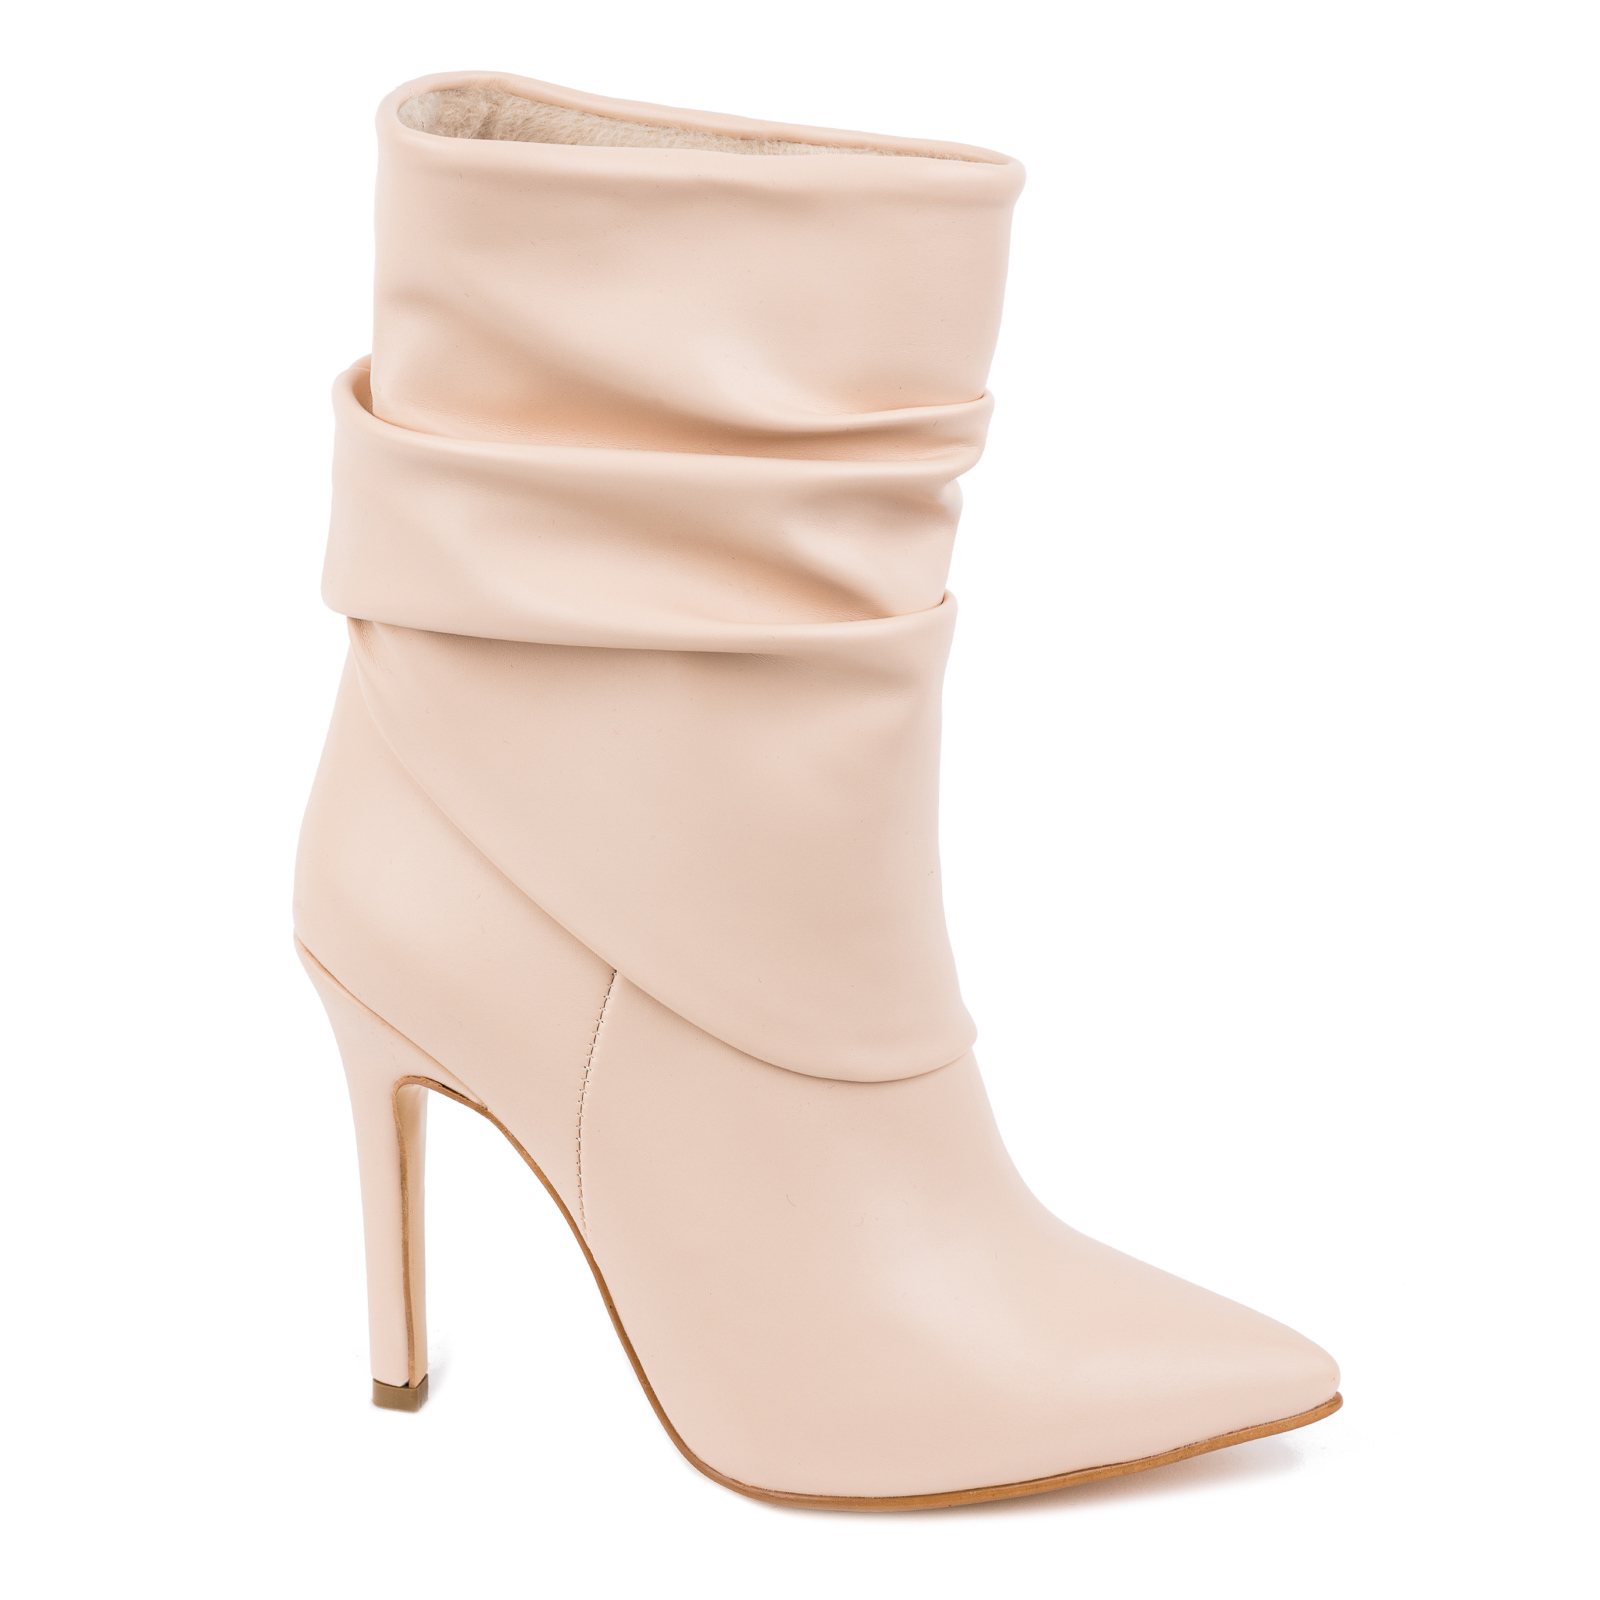 POINTED WRINKLED ANKLE BOOTS WITH THIN HEEL - BEIGE